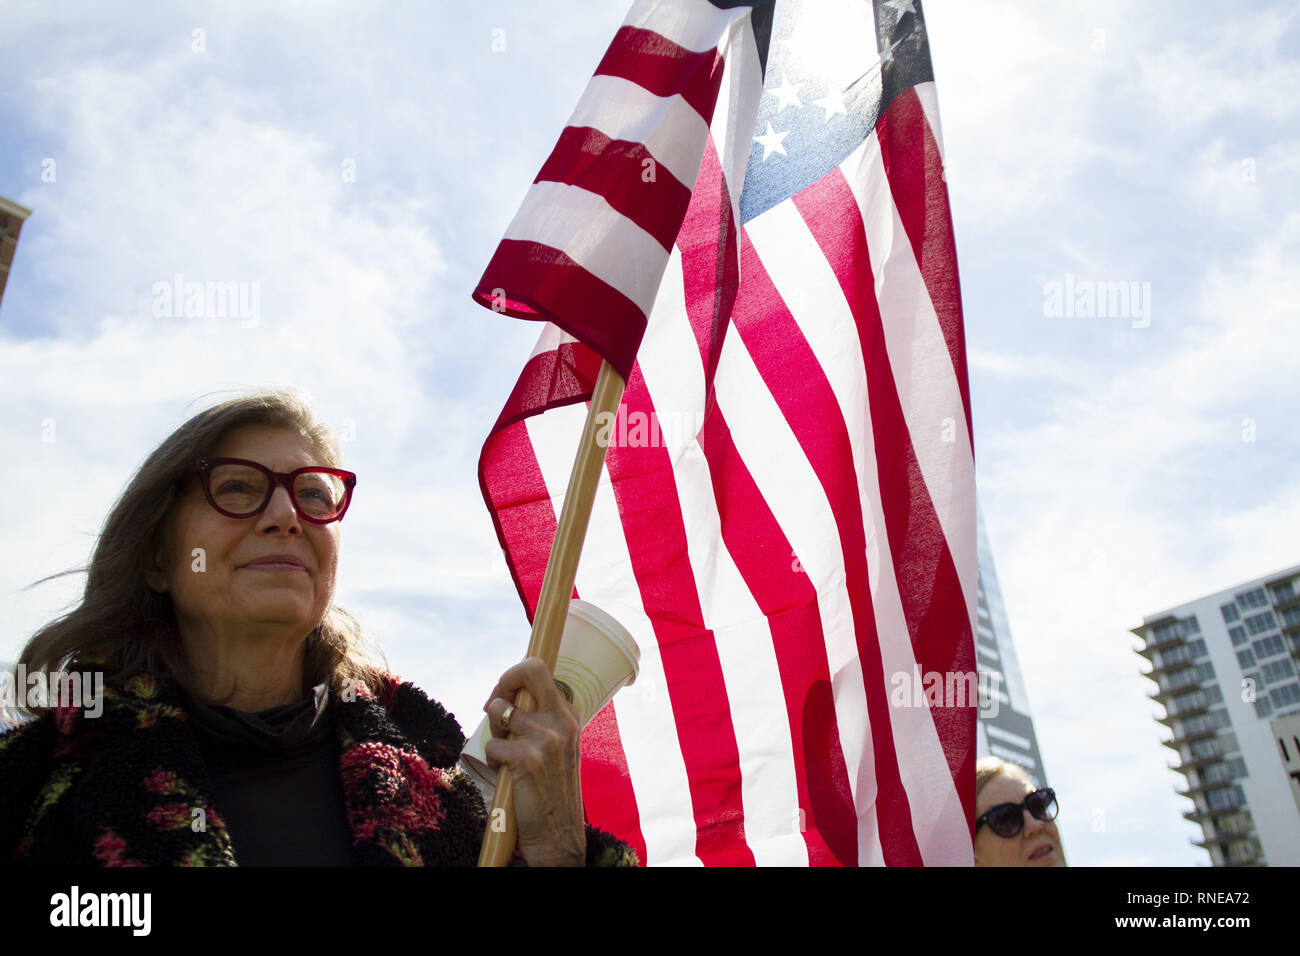 Austin, Texas, USA. 18th Feb, 2019. An unidentified woman holds the American flag during the President Day's protest at Republic Square Park in Austin Texas.The protest is part of the Emergency Action protests across the country denouncing President Trump's policies against immigration and the building of a wall along the Rio Grande. Credit: Jaime Carrero/ZUMA Wire/Alamy Live News Stock Photo